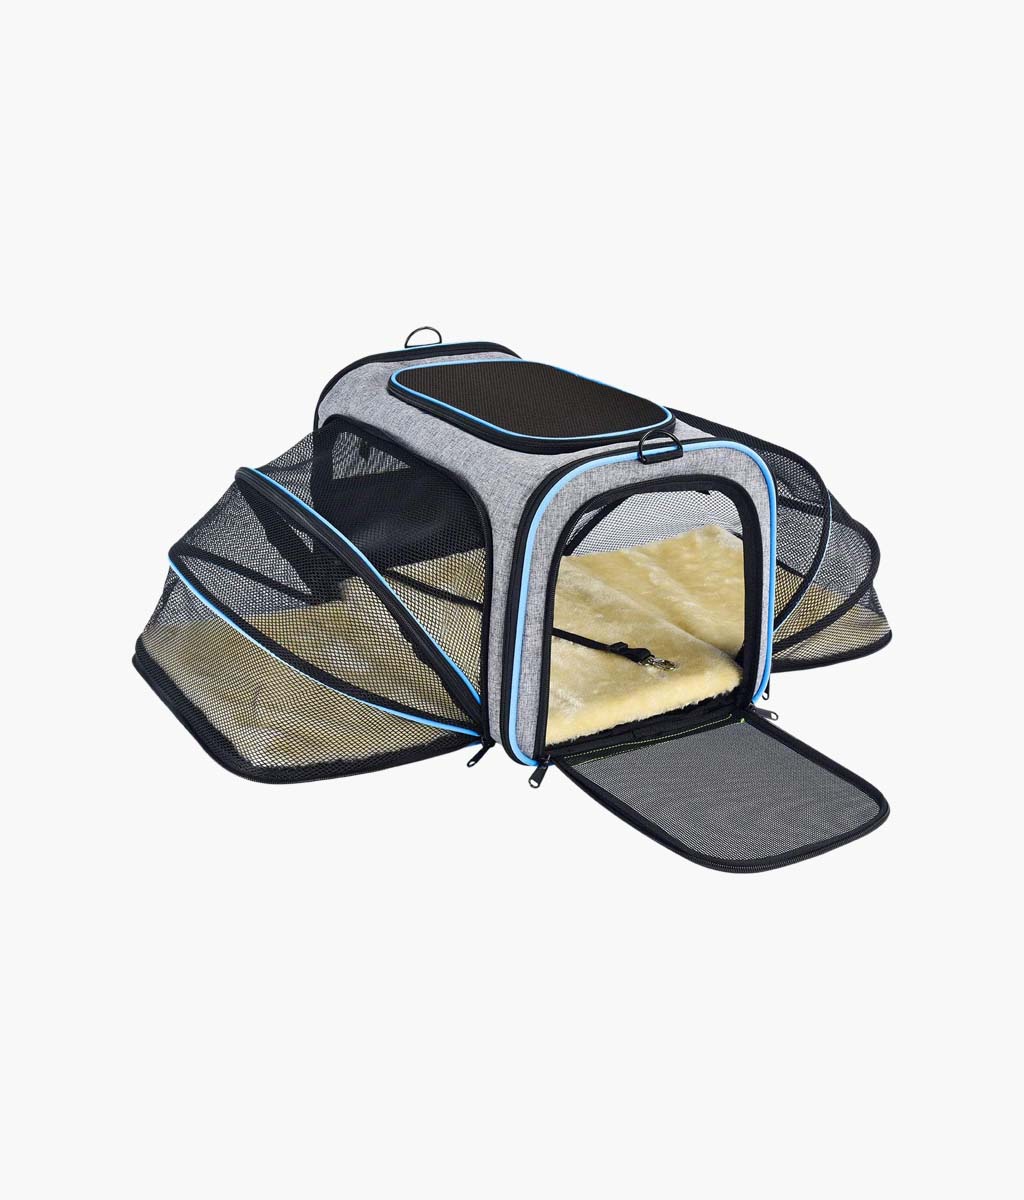 Expandable Soft-Sided Dog Carrier